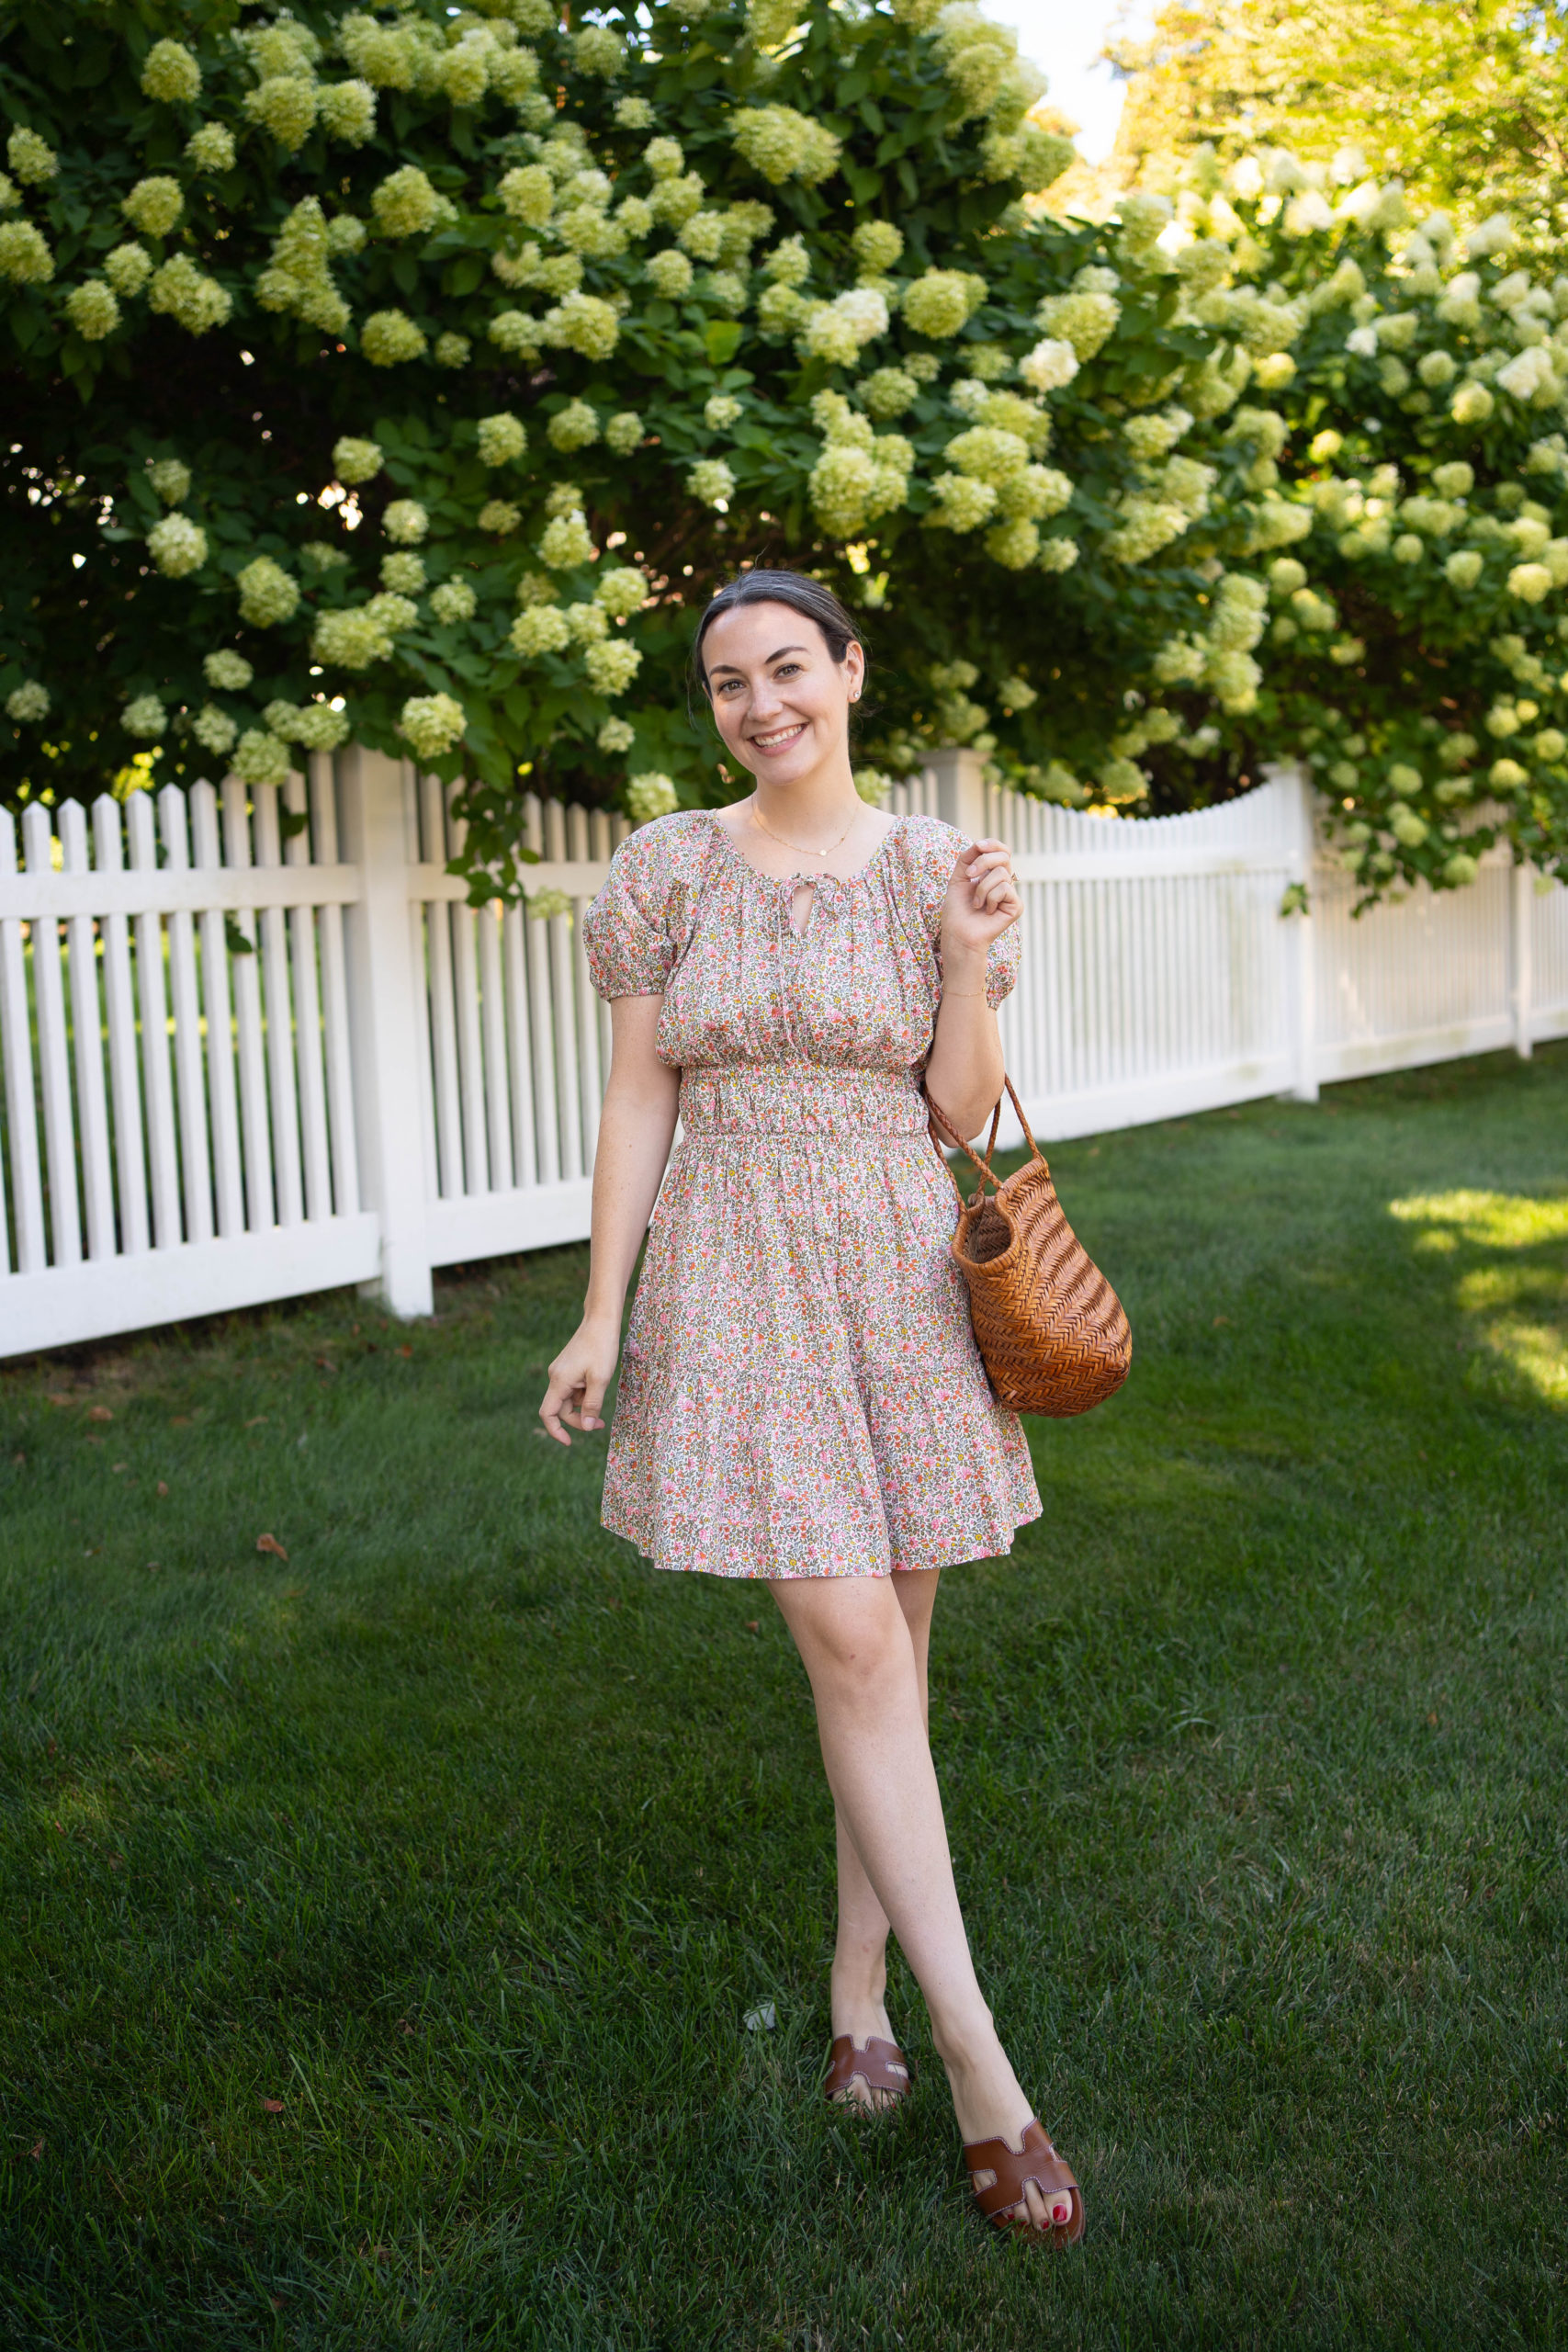 Carly Riordan wearing the J. Crew cinched-waist puff-sleeve dress in scattered blooms floral print.